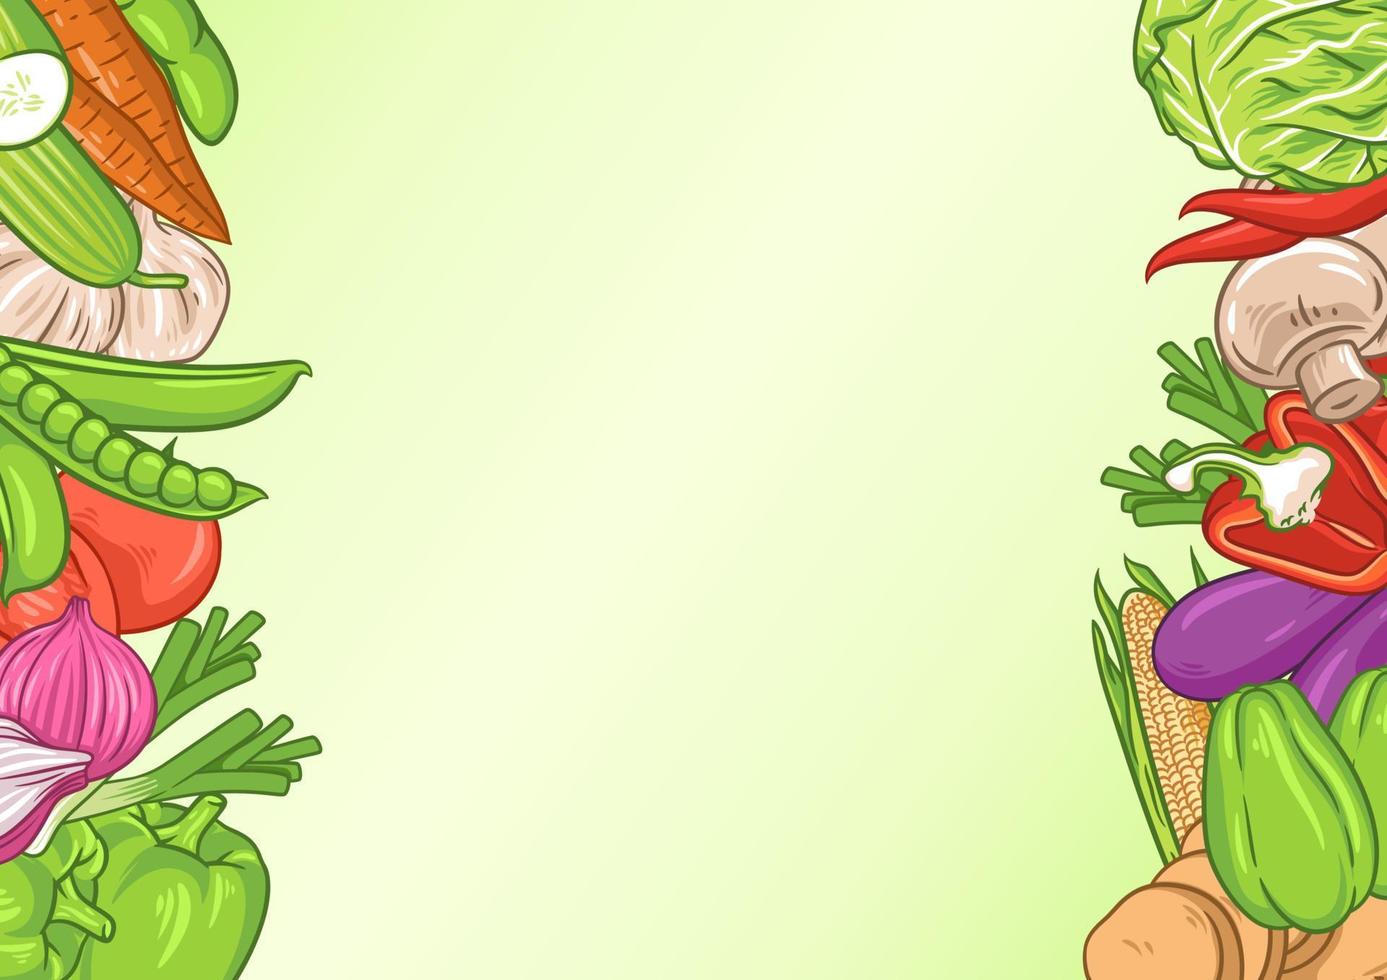 Vegetables background with text space vector